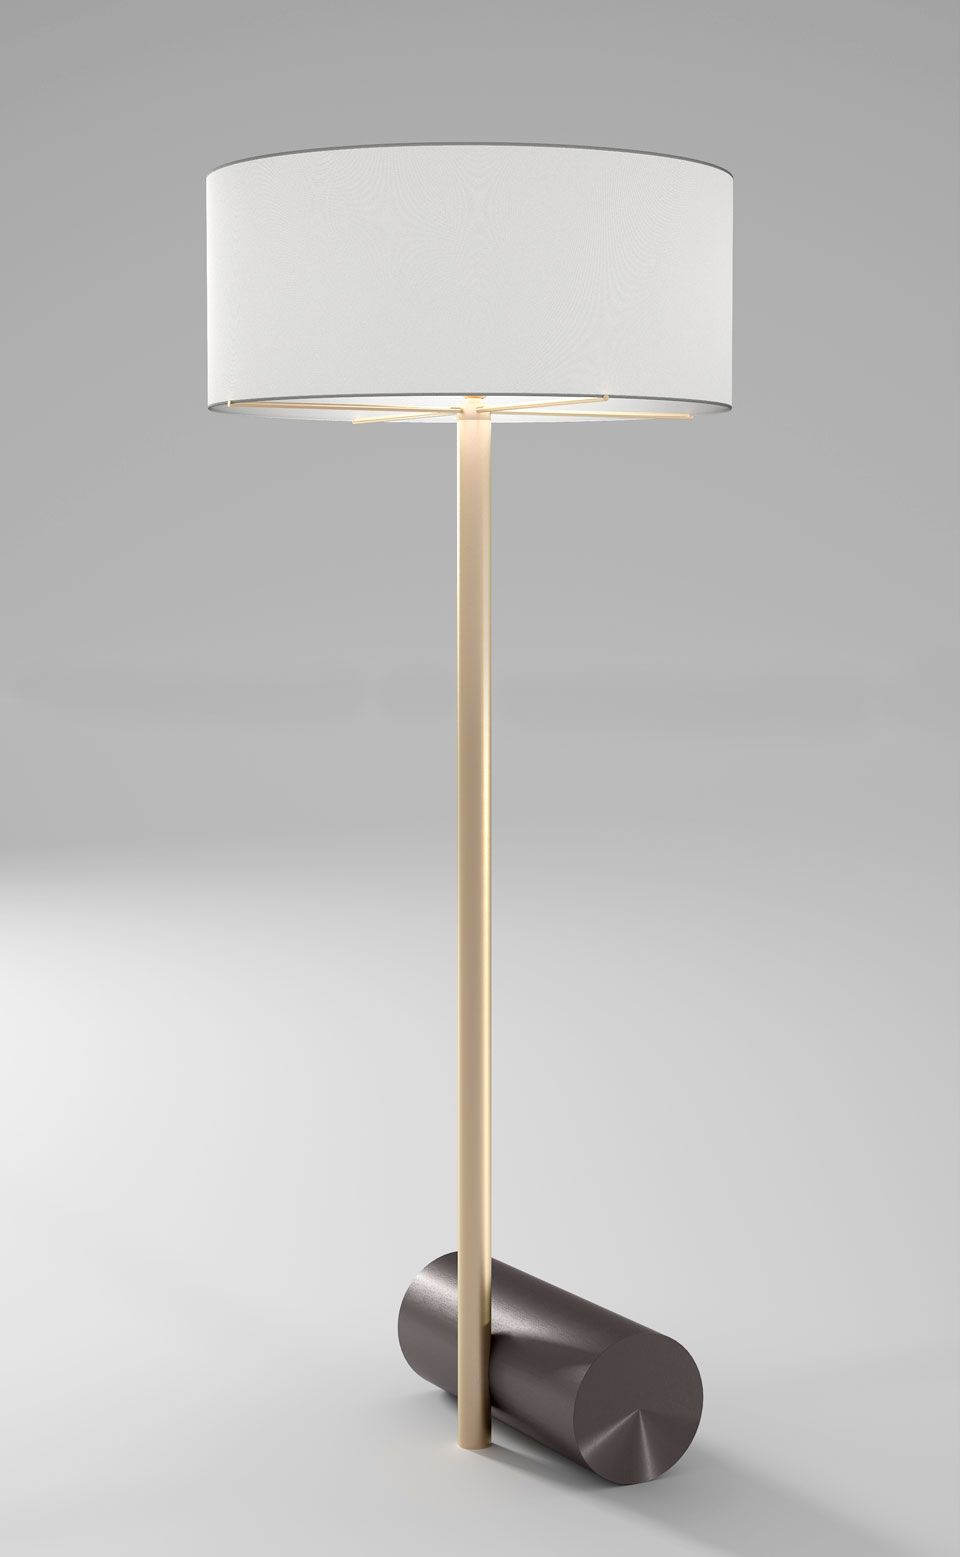 Calée Xl Large Floor Lamp, Cylindrical Base, Satin Brass And Graphite Cvl  Luminaires – Contemporary Lighting, Made In France, Massive Brass – Réf (View 14 of 15)